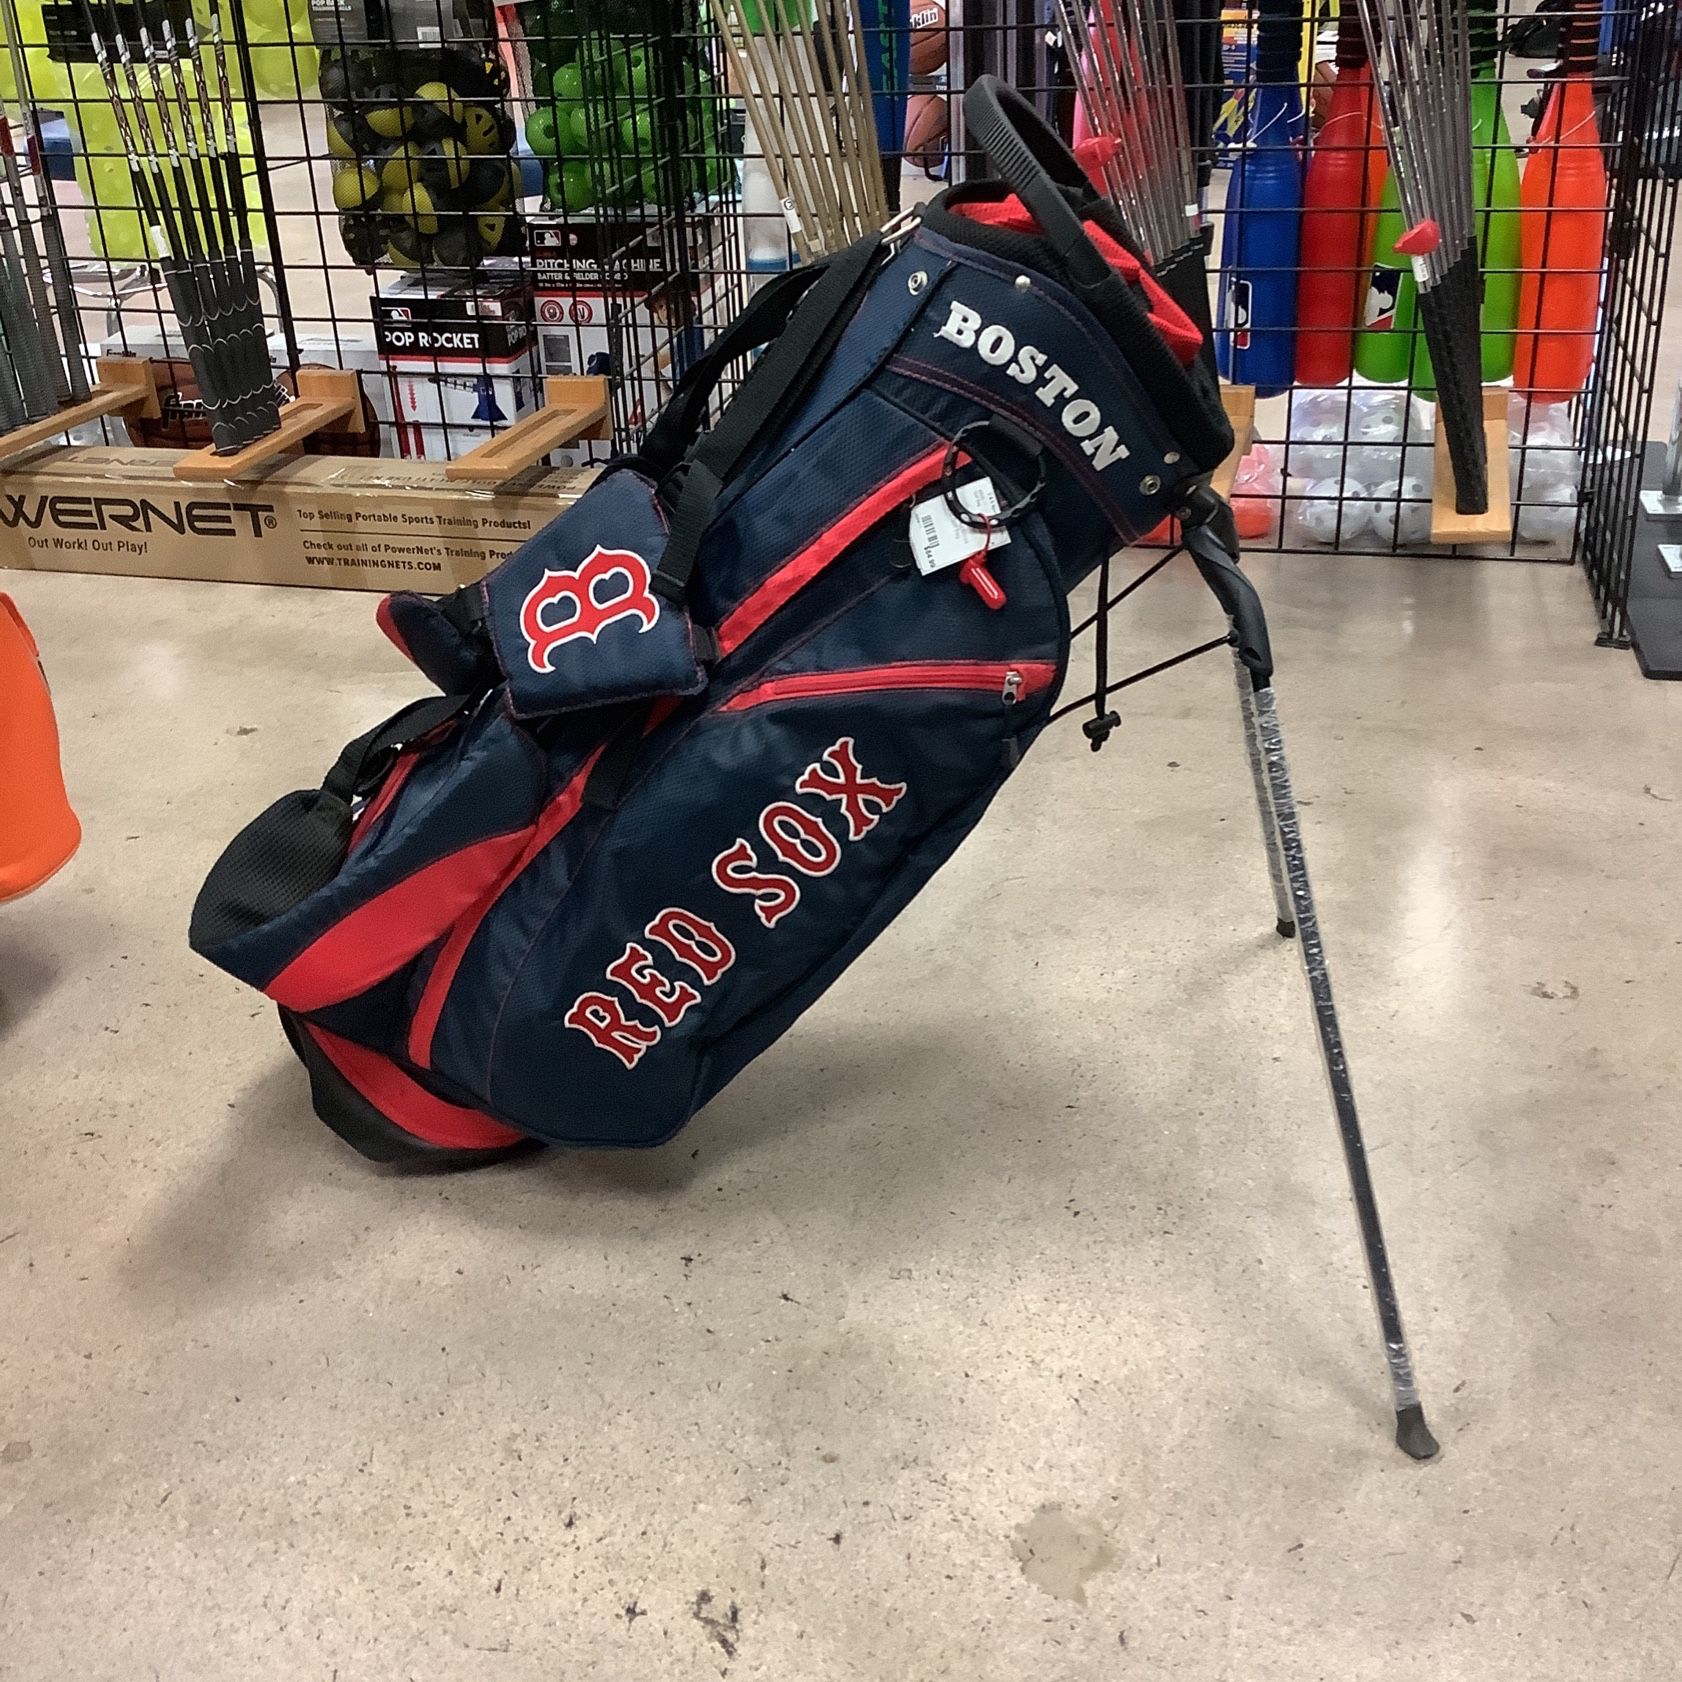 Boston Red Sox Stand Golf Bag SKU 43930-11 for Sale in Phoenix, AZ - OfferUp